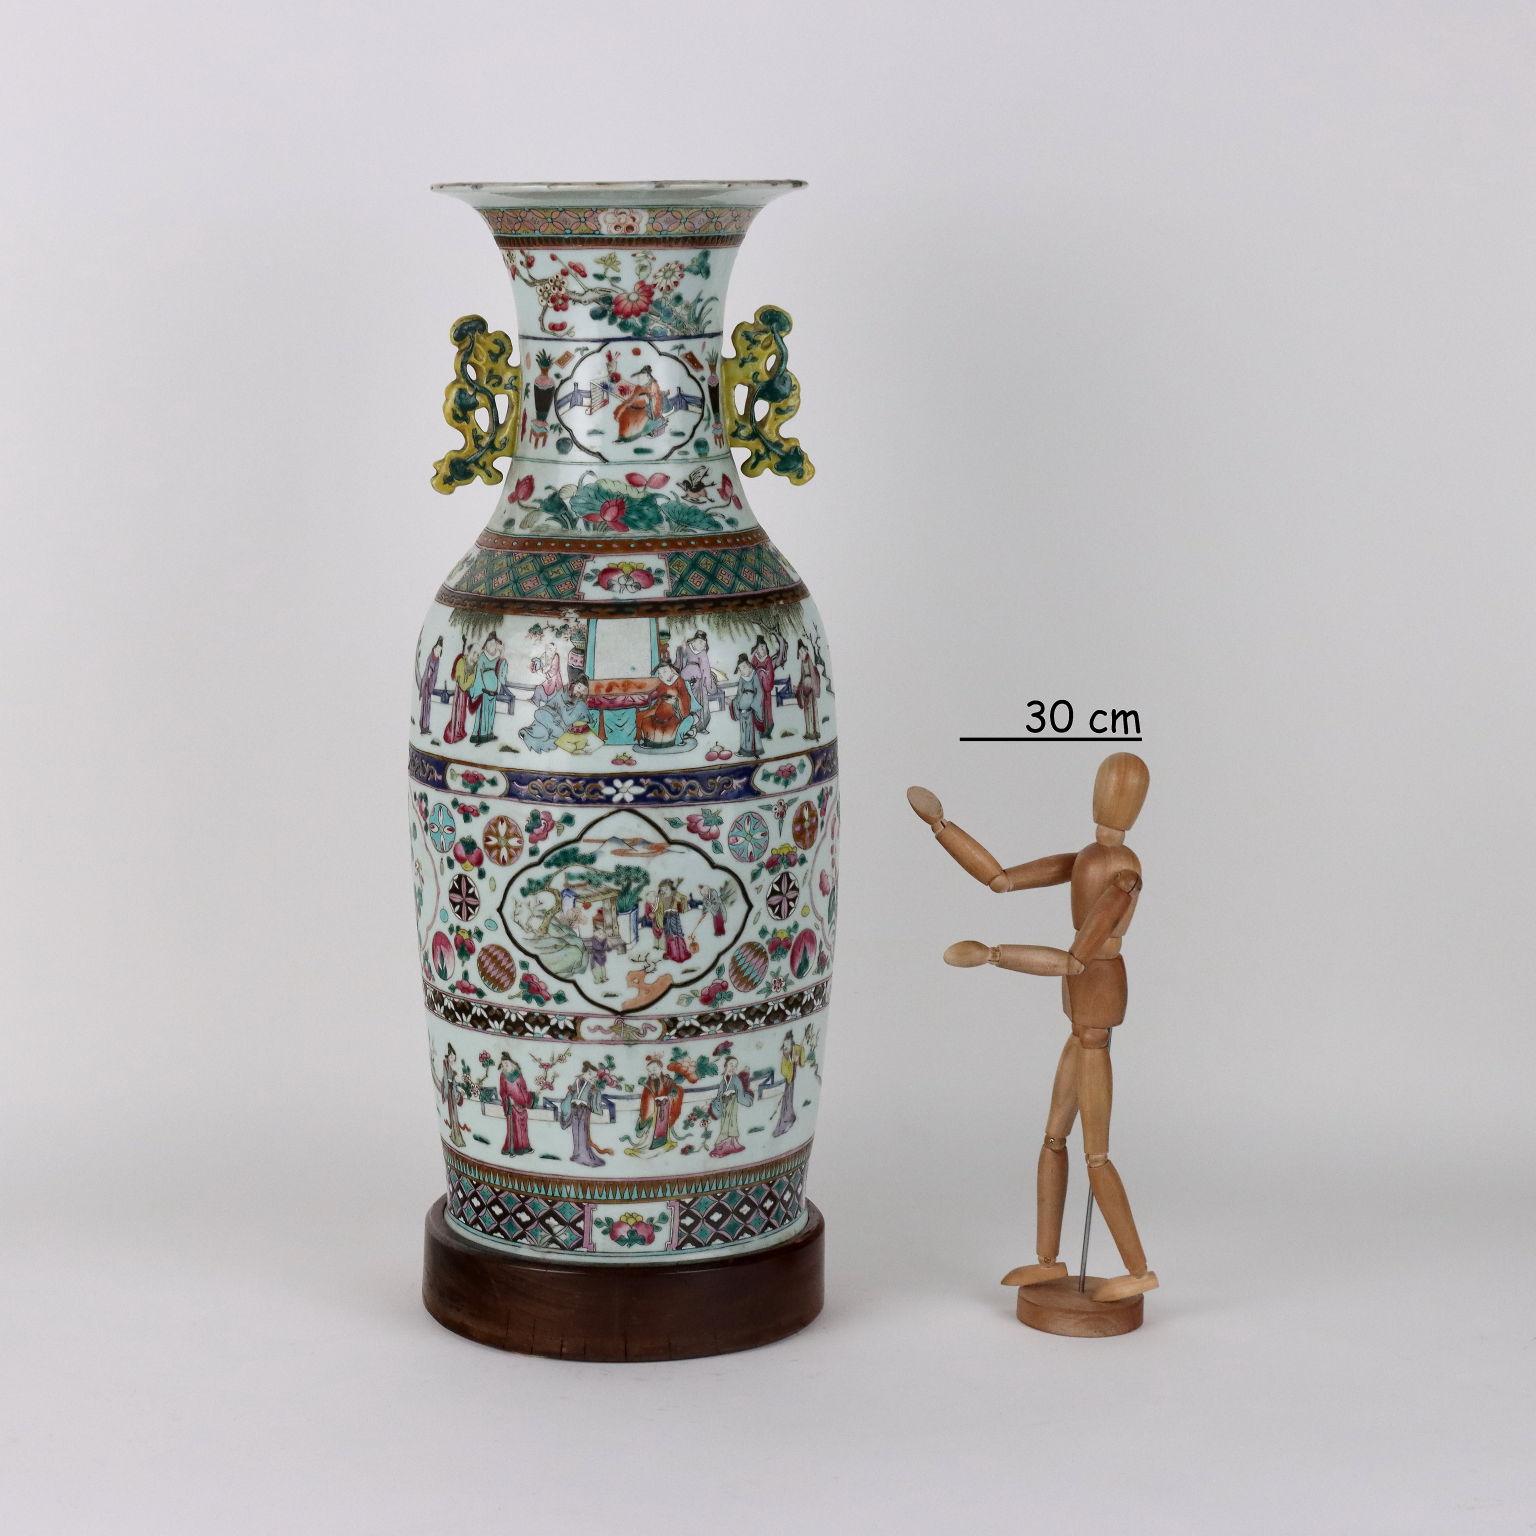 Large baluster porcelain vase decorated with polychrome glazes in horizontal bands with scenes of courtly life interspersed with geometric bands and lozenges. Lingzhi mushroom-shaped side loops. China Guangxu era (1875-1908).